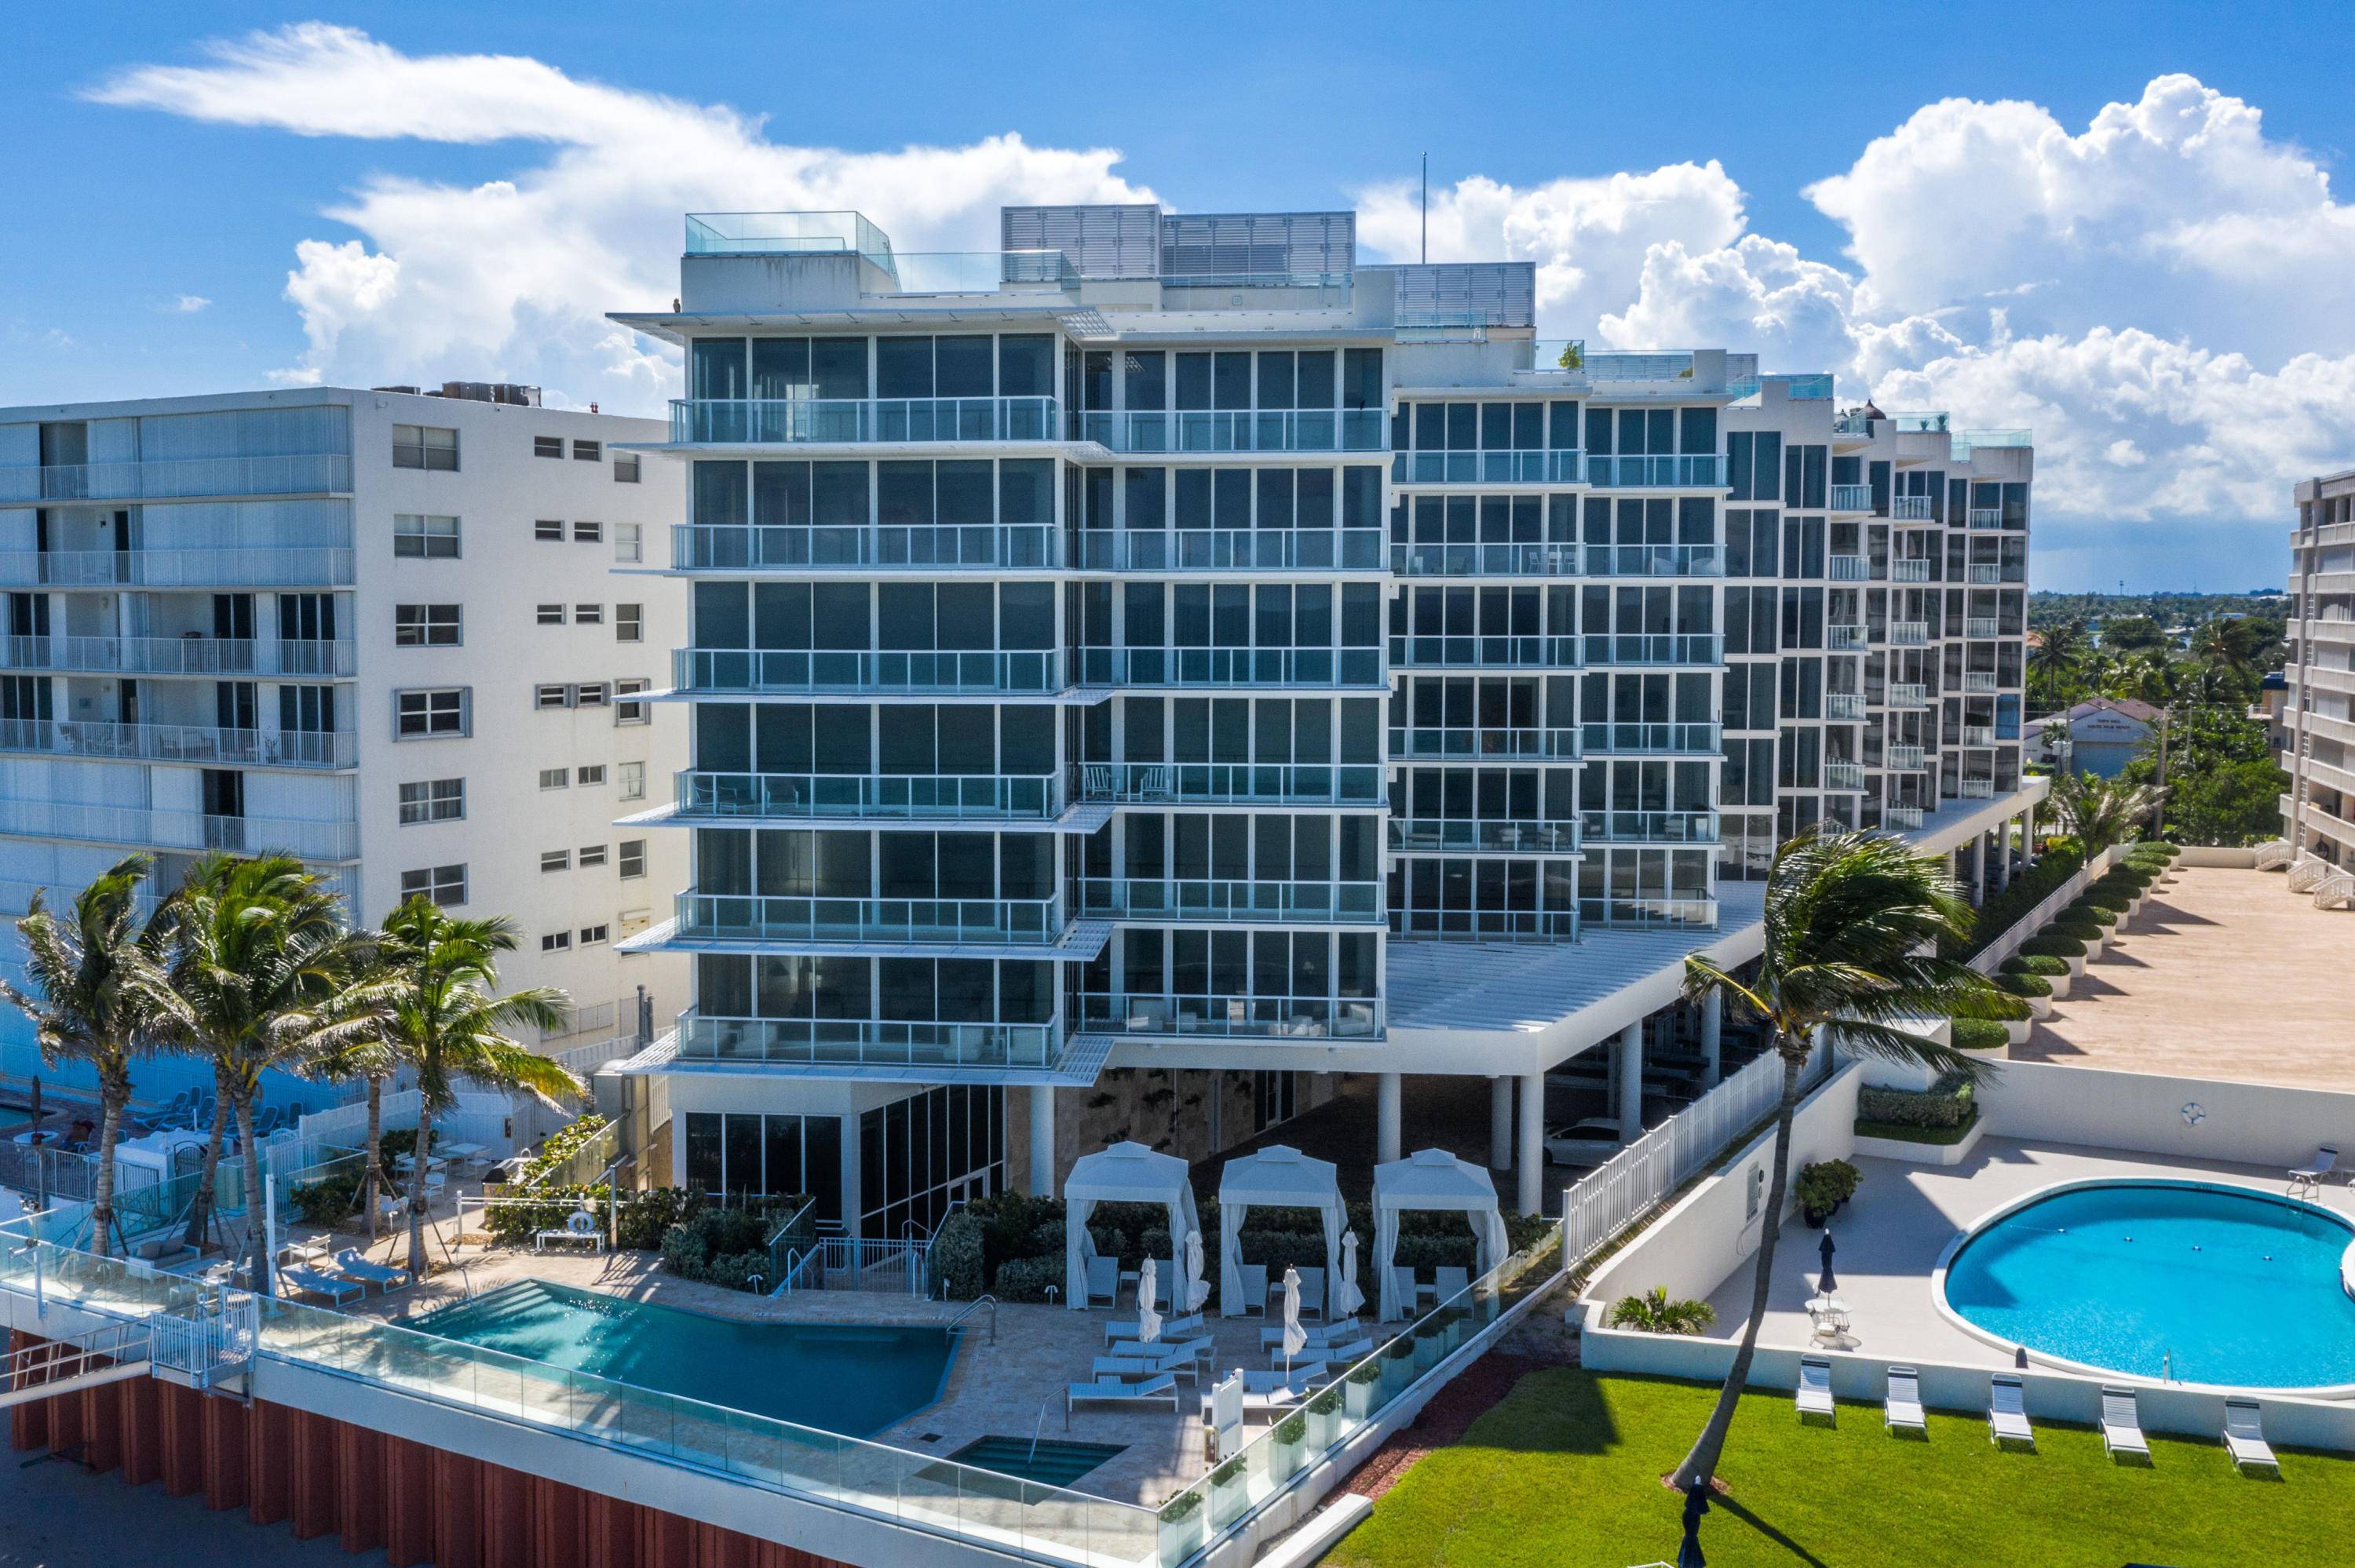 Three 3 luxury oceanfront residences remaining in this modern and classic new development.